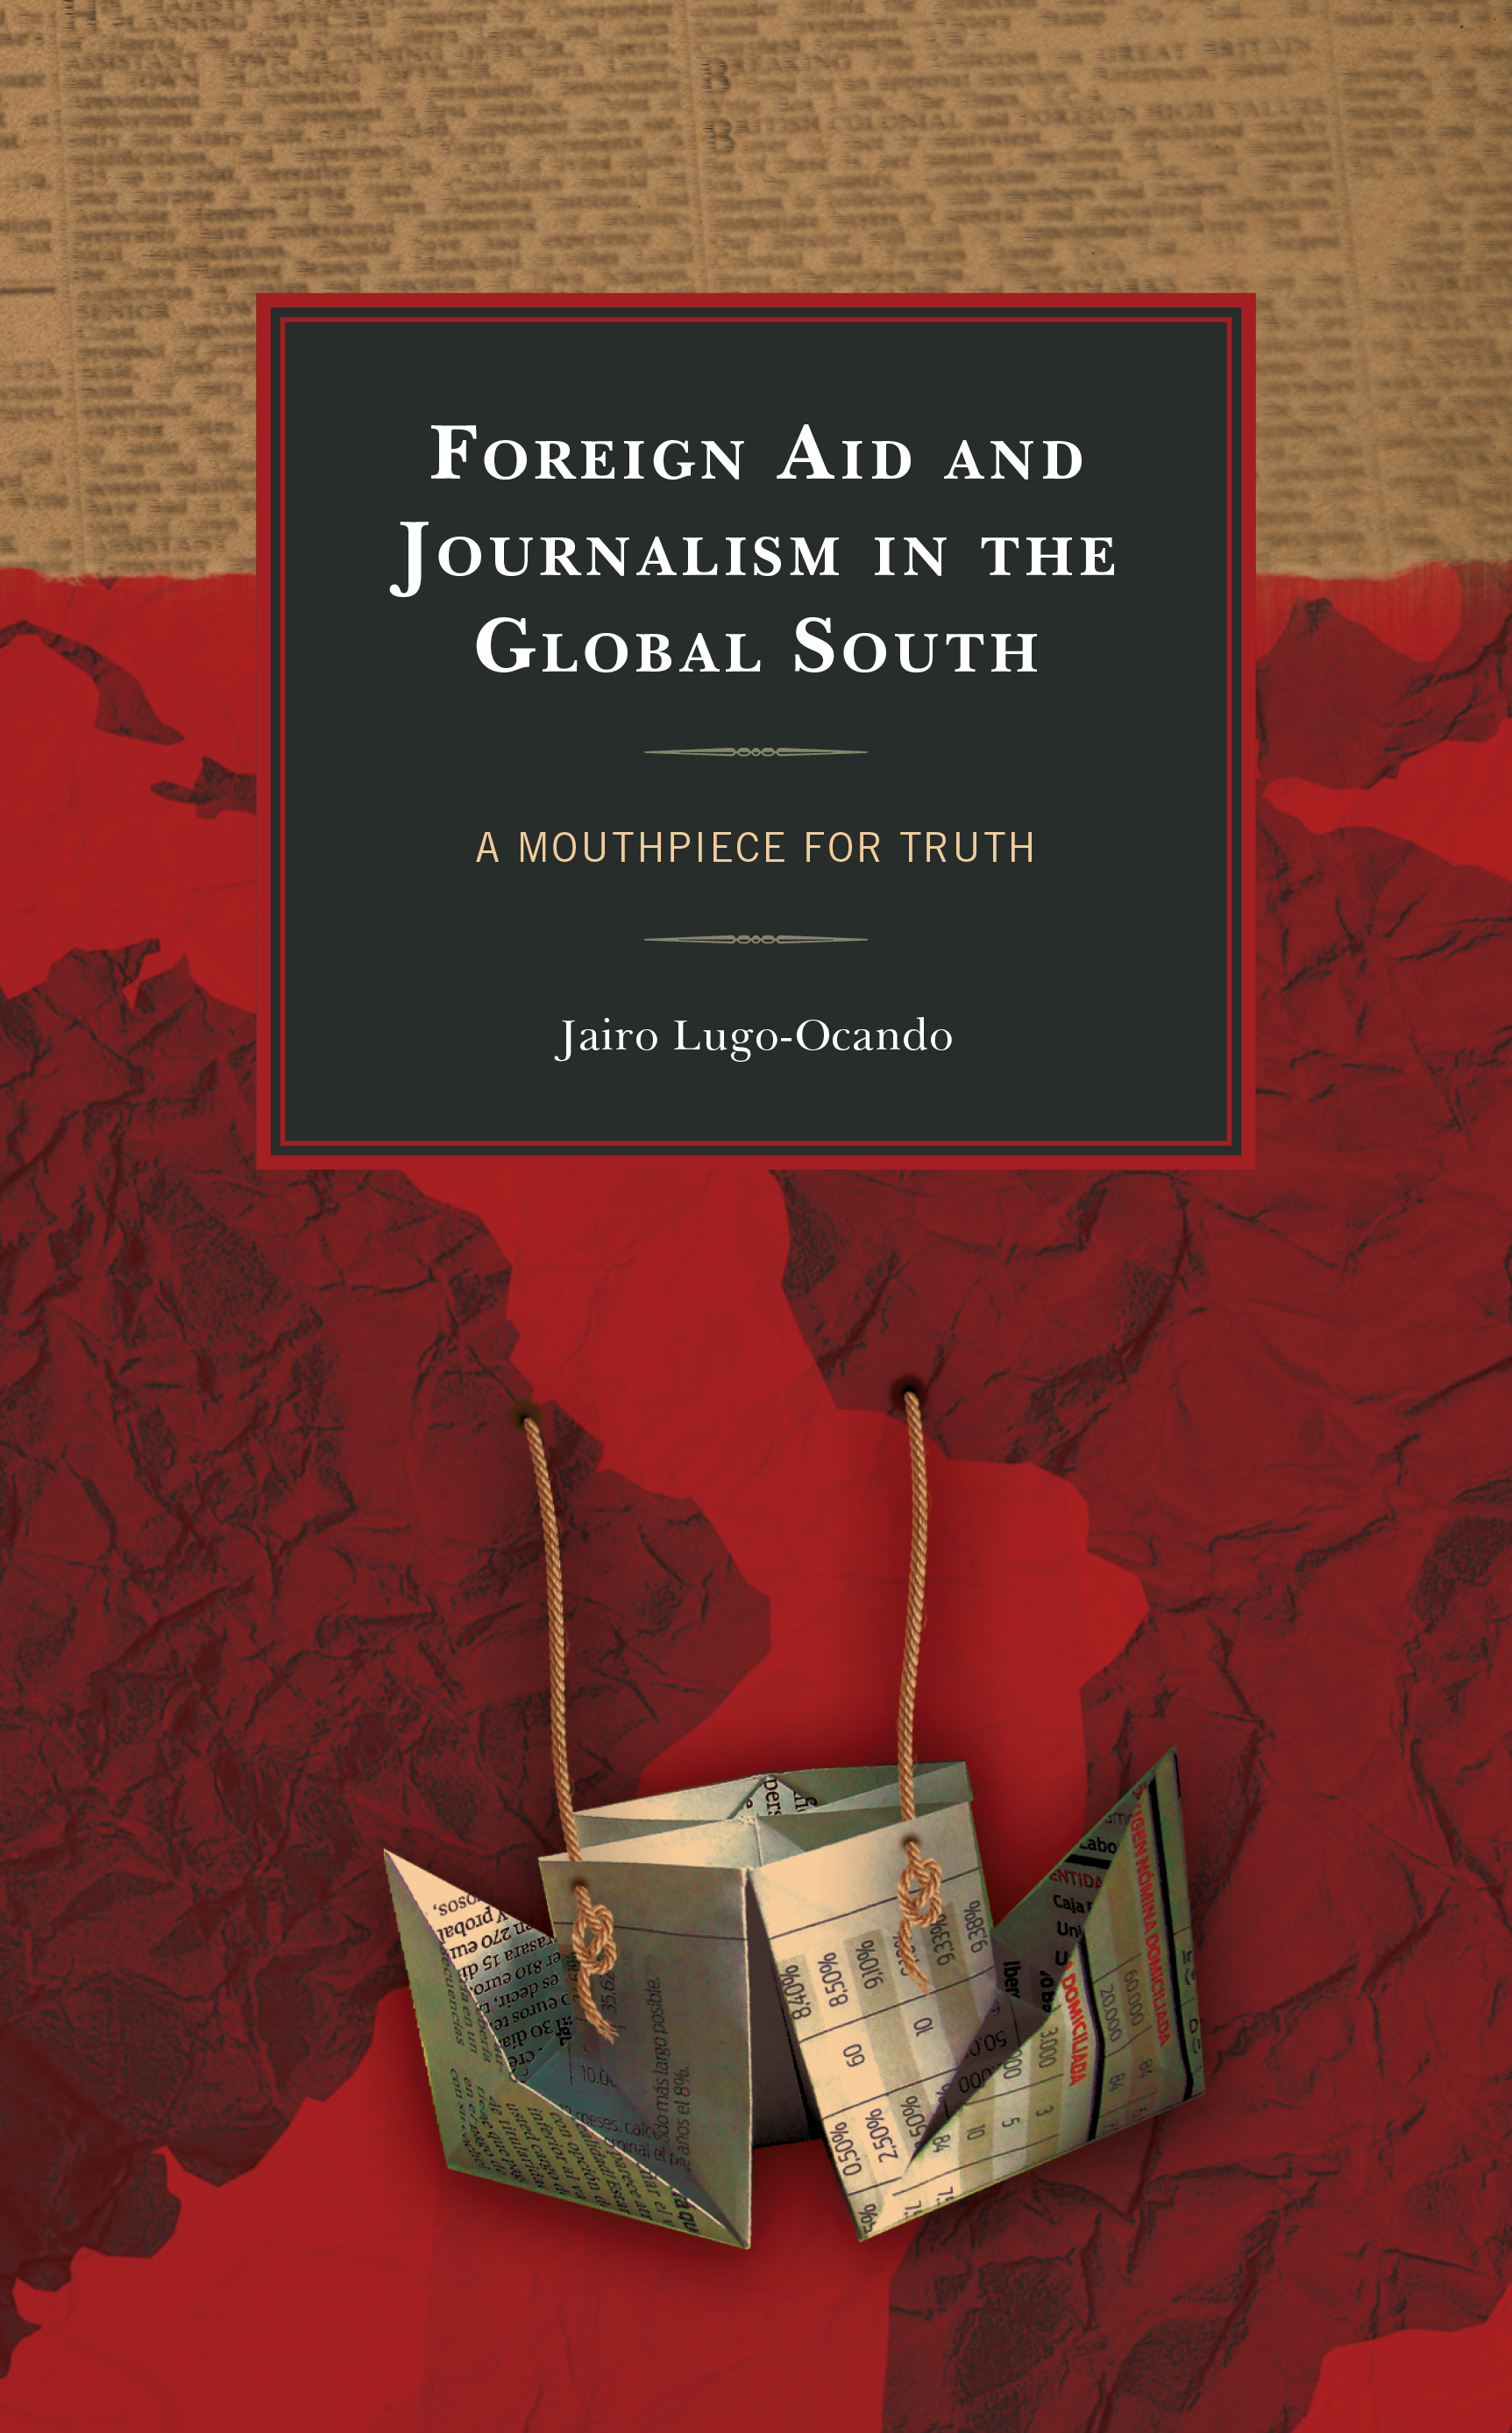 Foreign Aid and Journalism in the Global South: A Mouthpiece for Truth